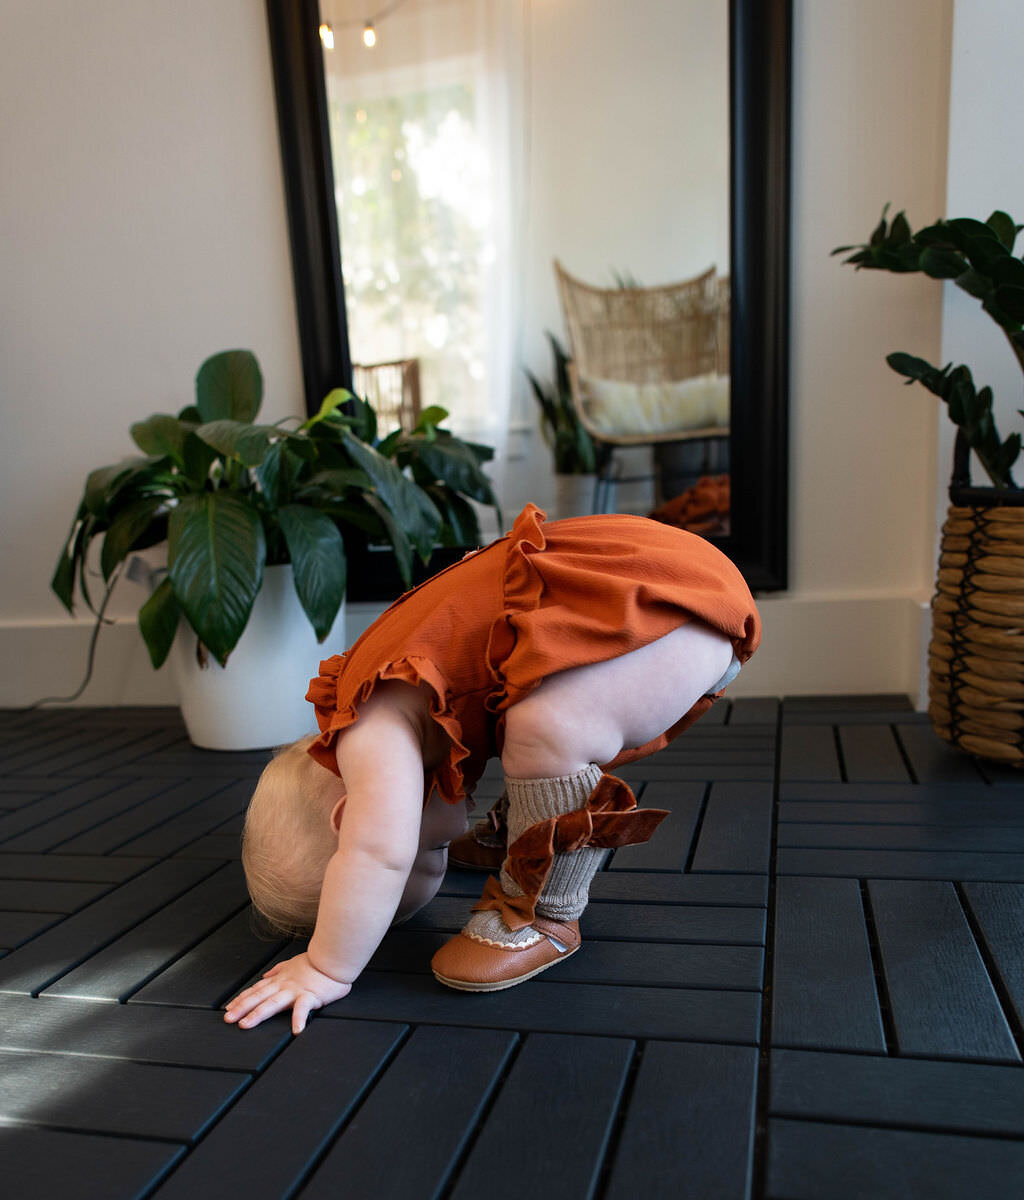 A one year old bent over with their feet and head on the ground.